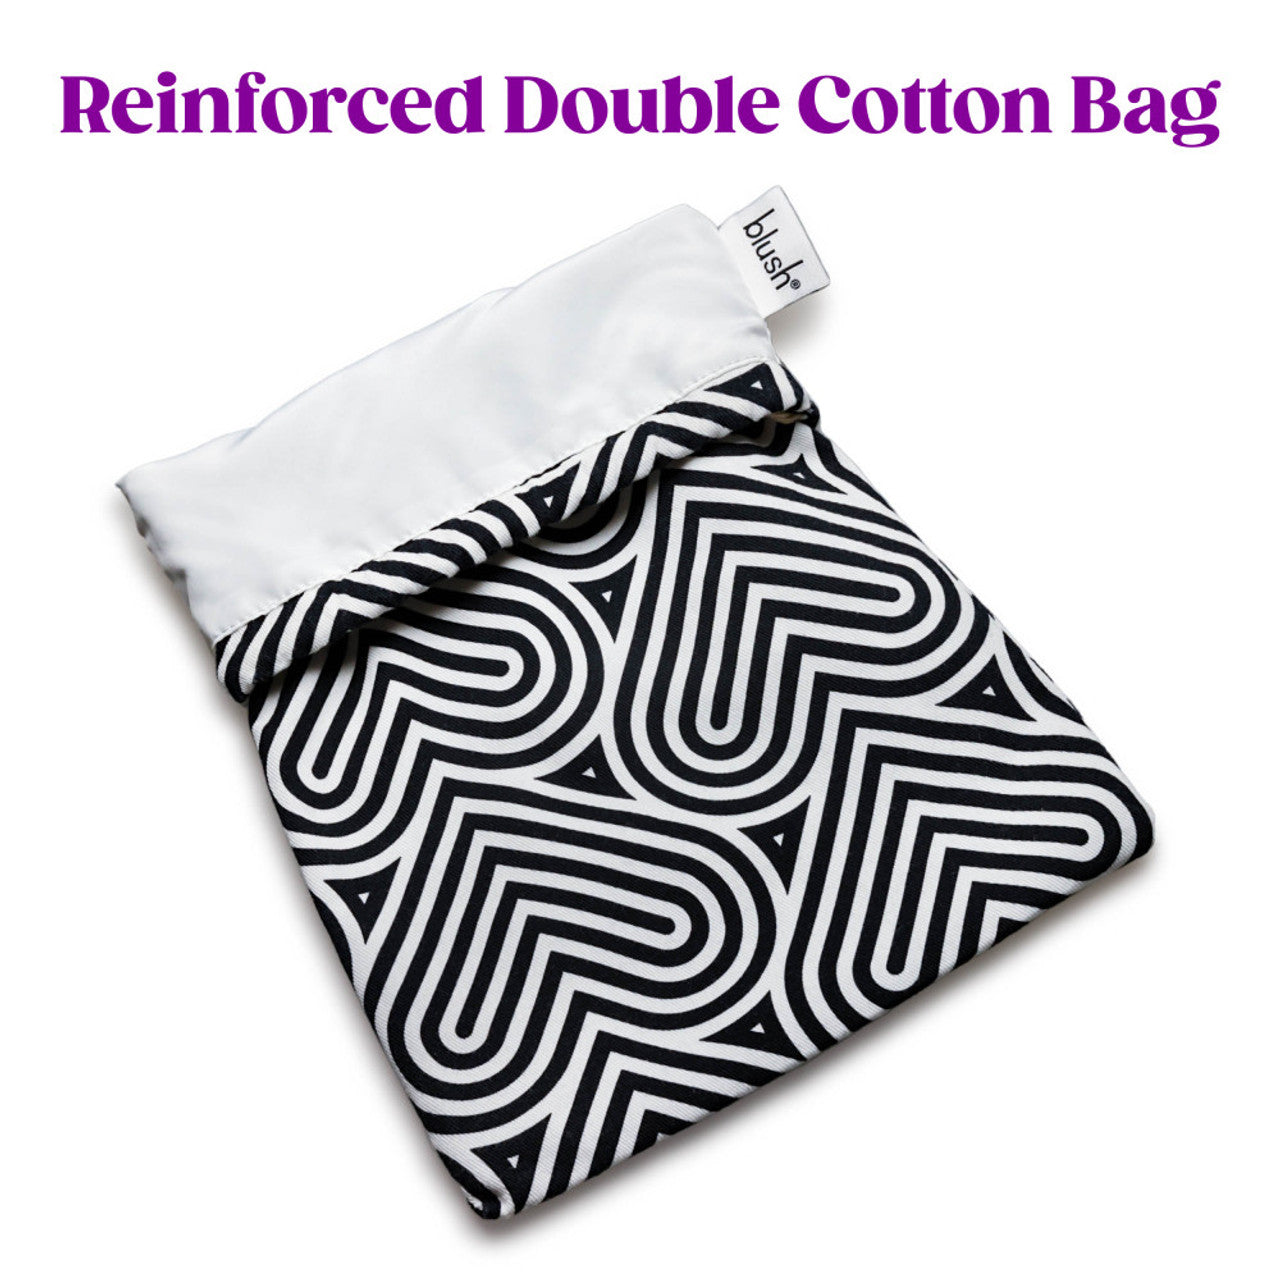 The Collection Bomba Cotton Toy Bag